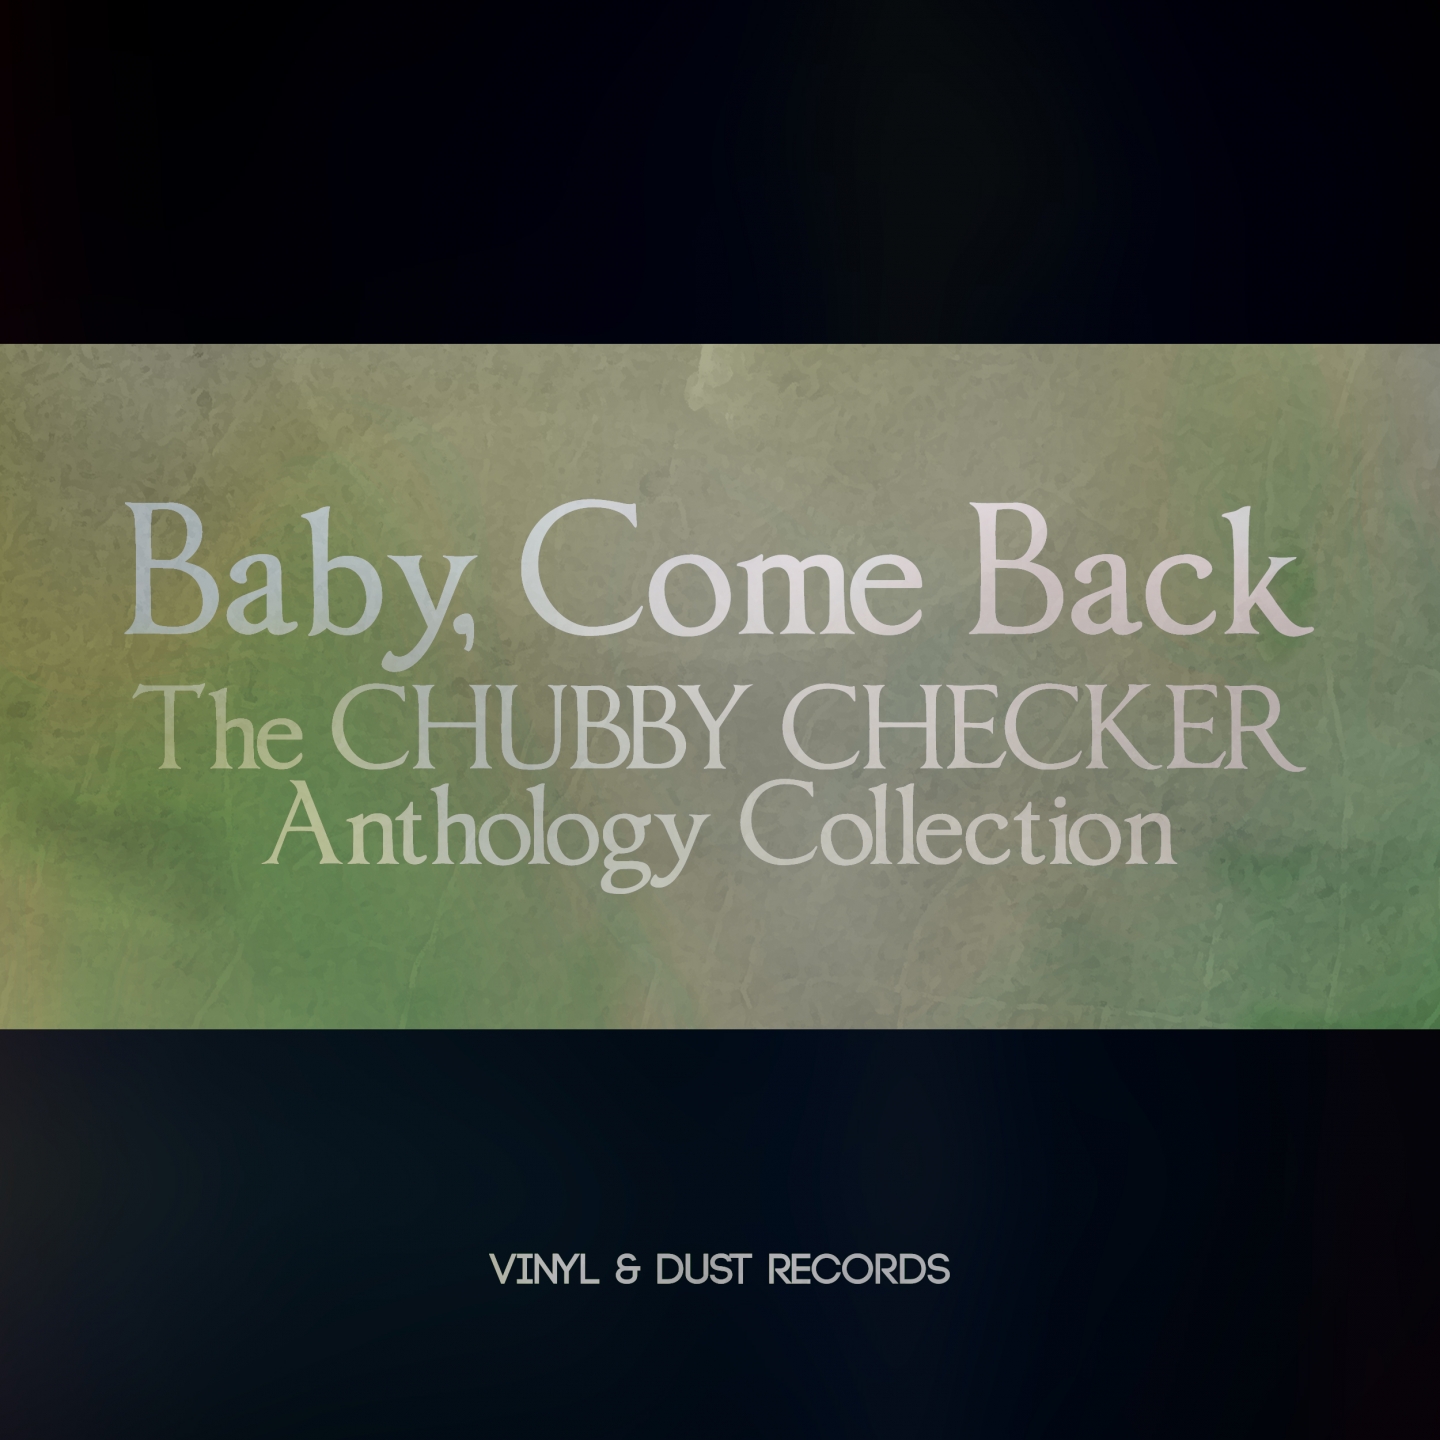 Baby Come Back (The Chubby Checker Anthology Collection)